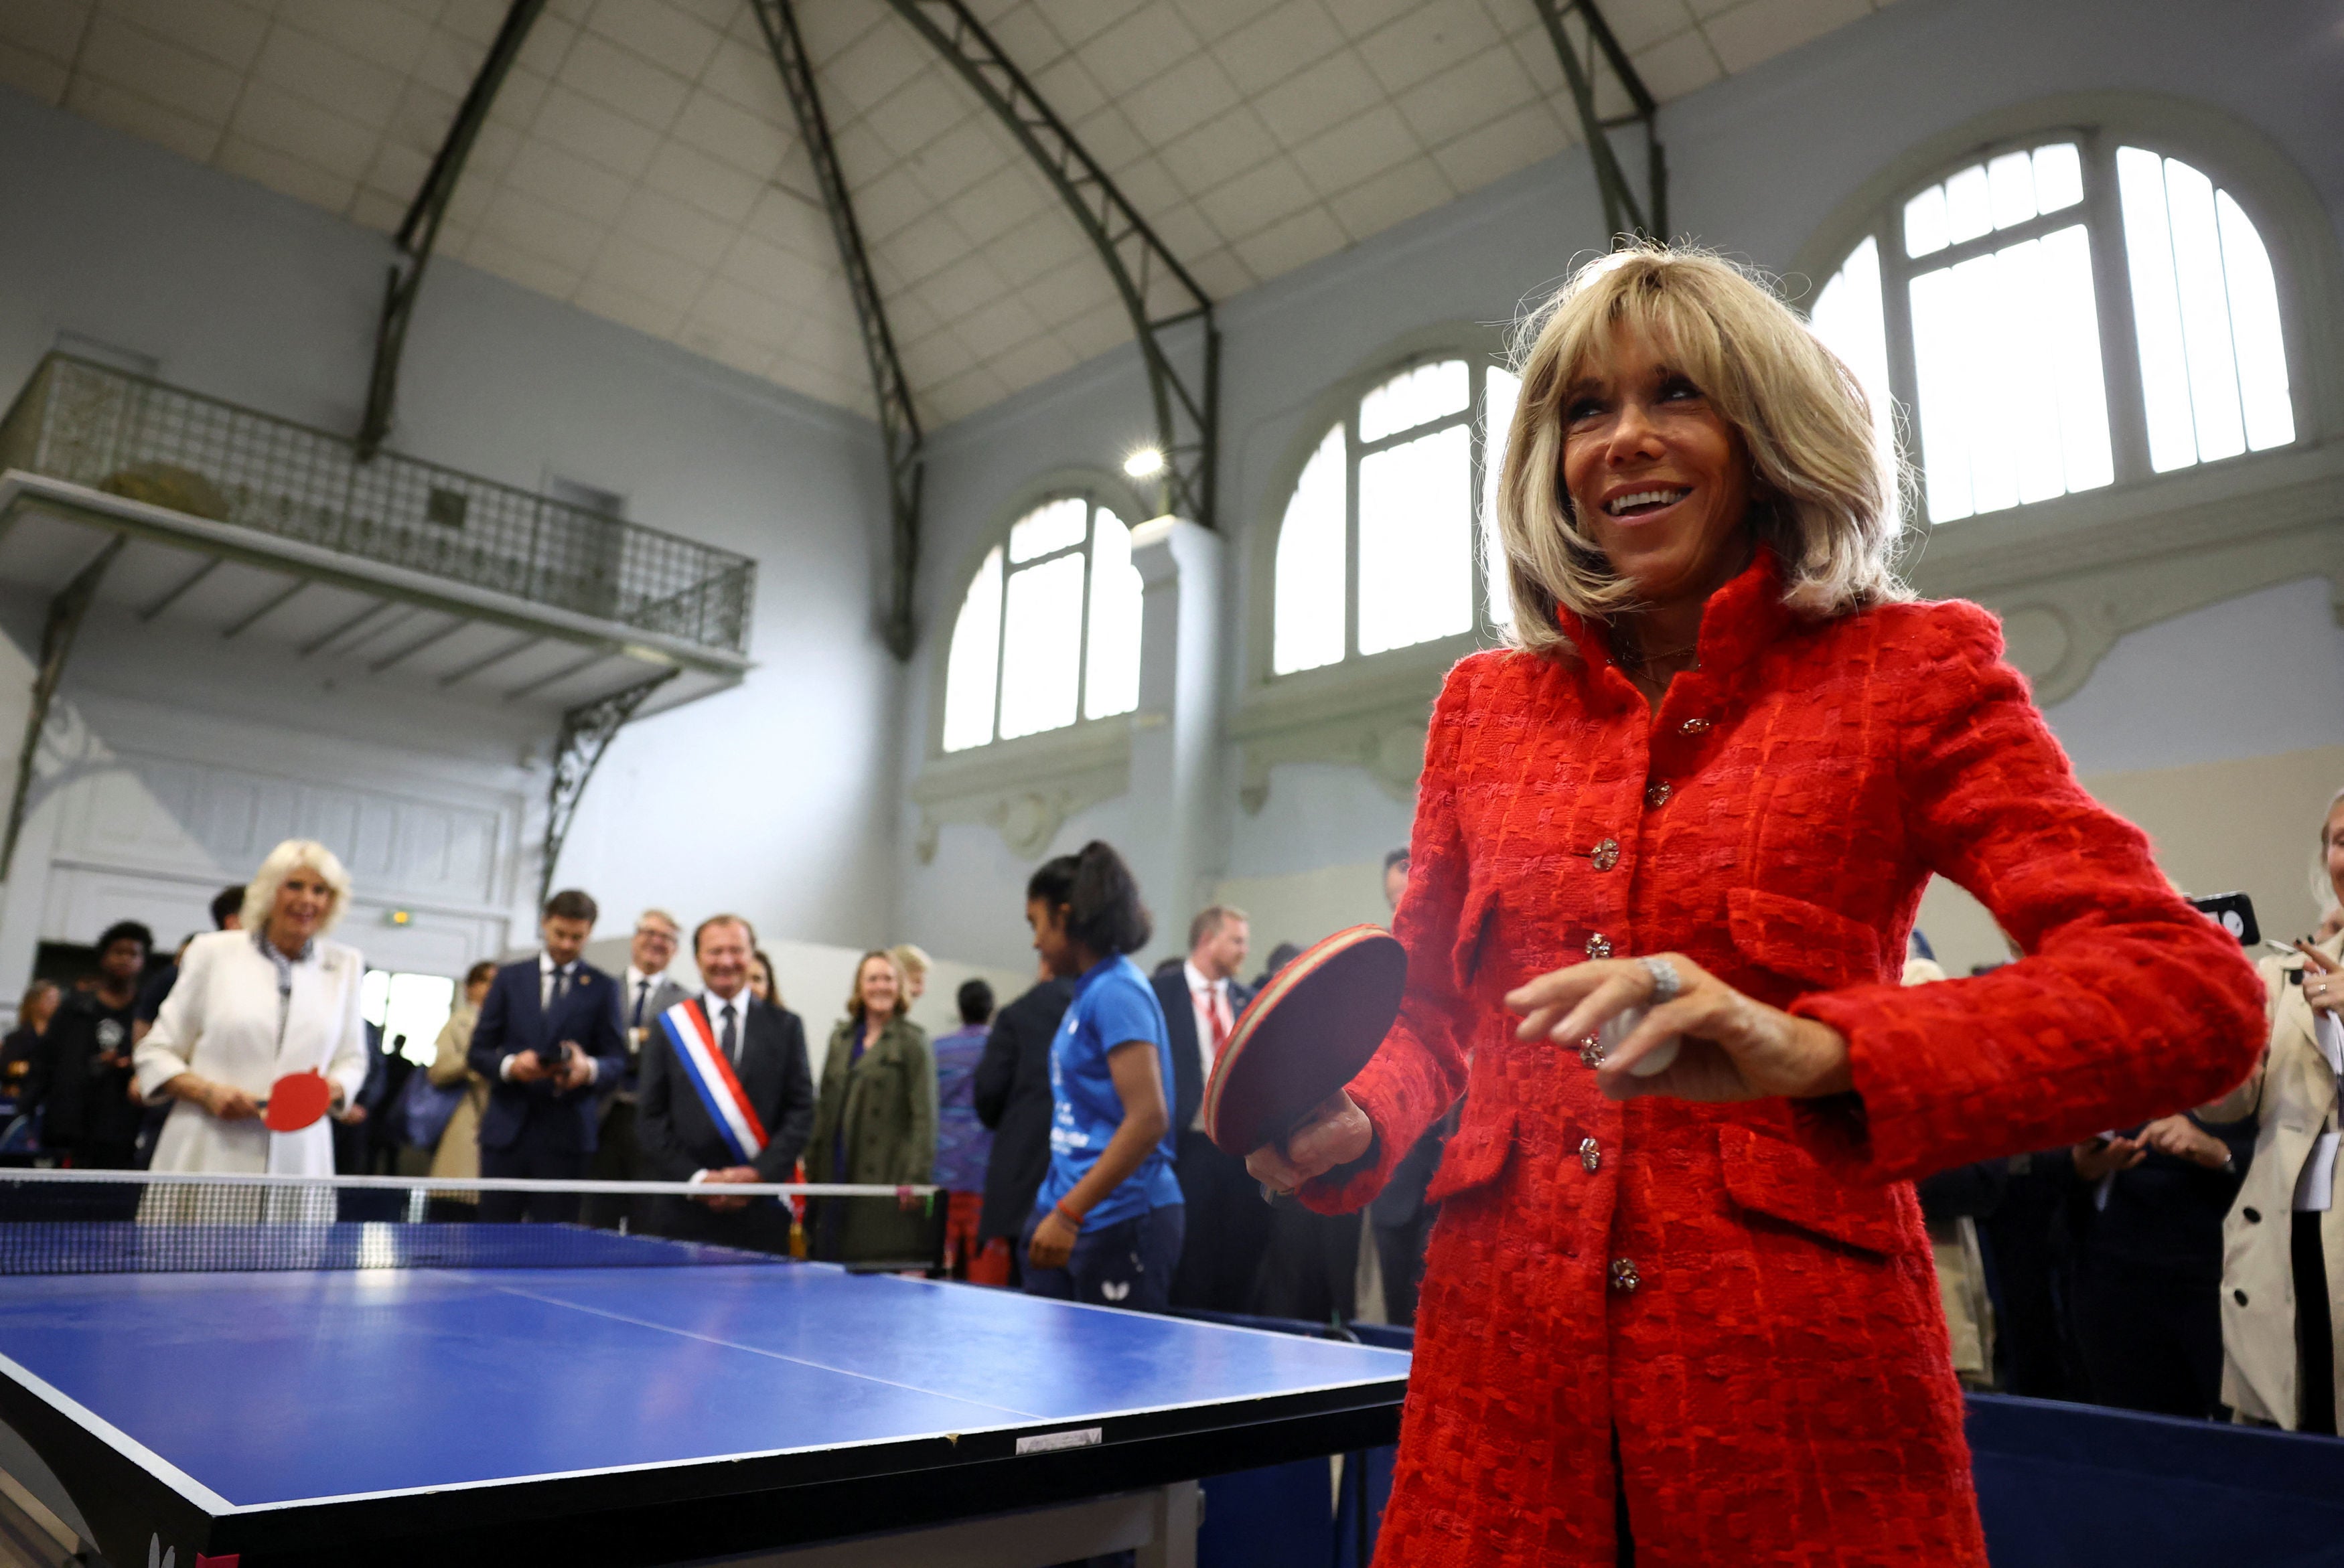 Camilla and the French first lady bonded over a game of table tennis at a community centre in Saint-Denis, northern Paris